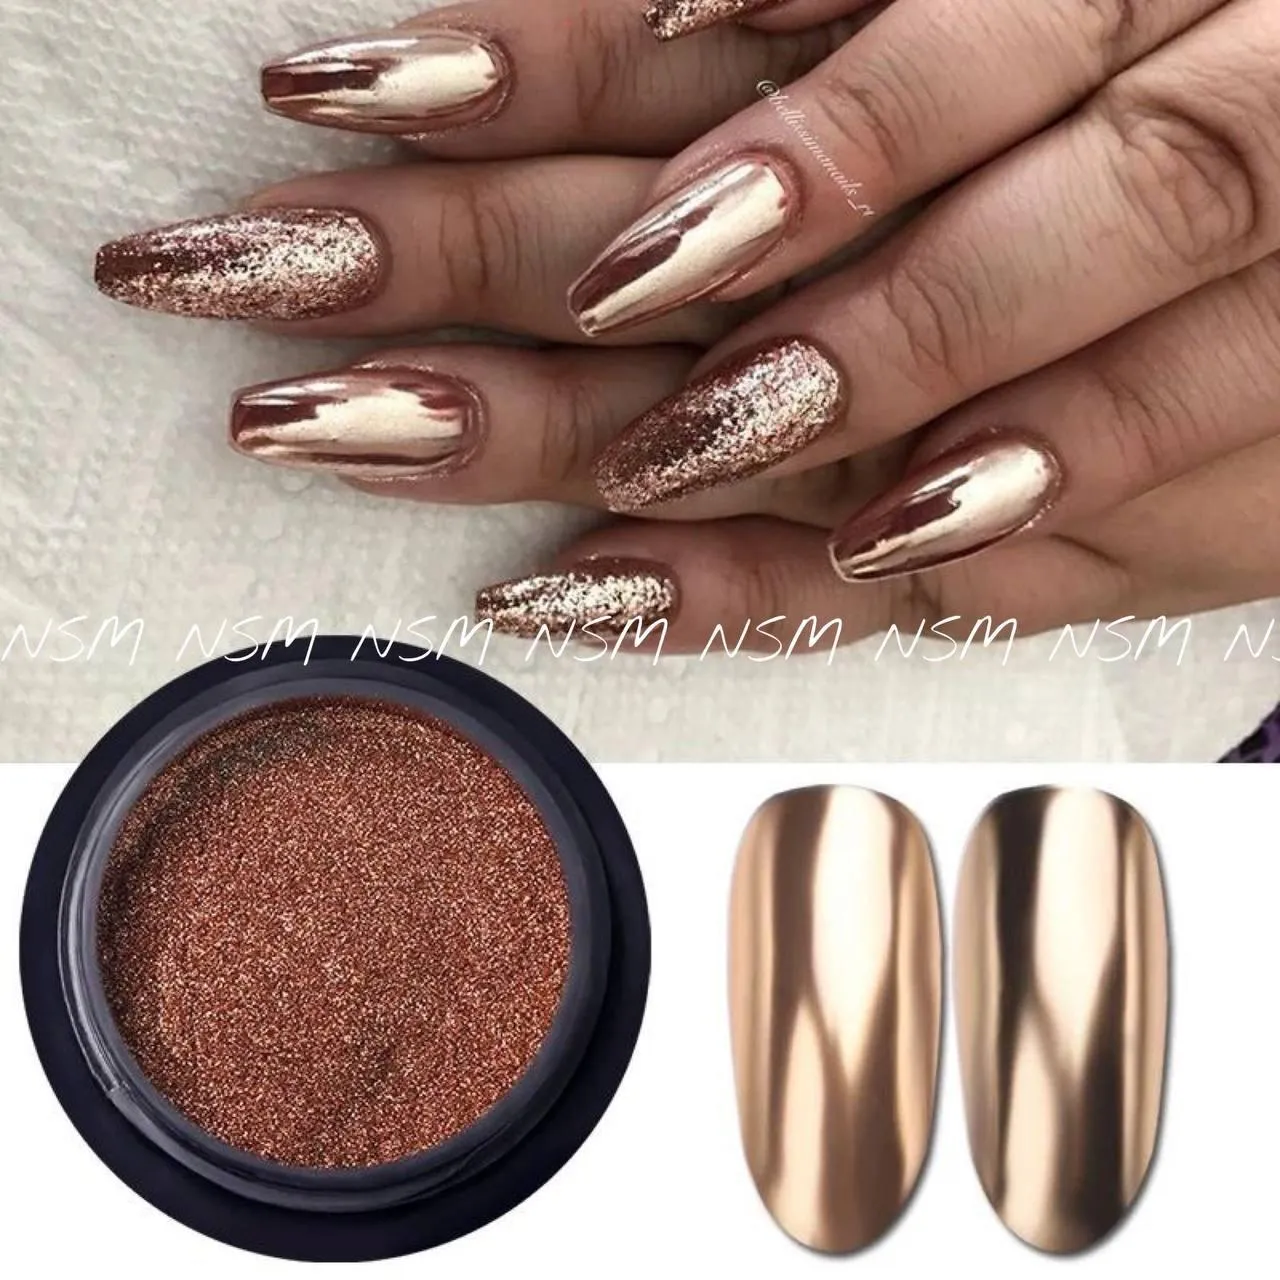 ILNP Muse - Radiant Copper Holographic Ultra Metallic Nail Polish